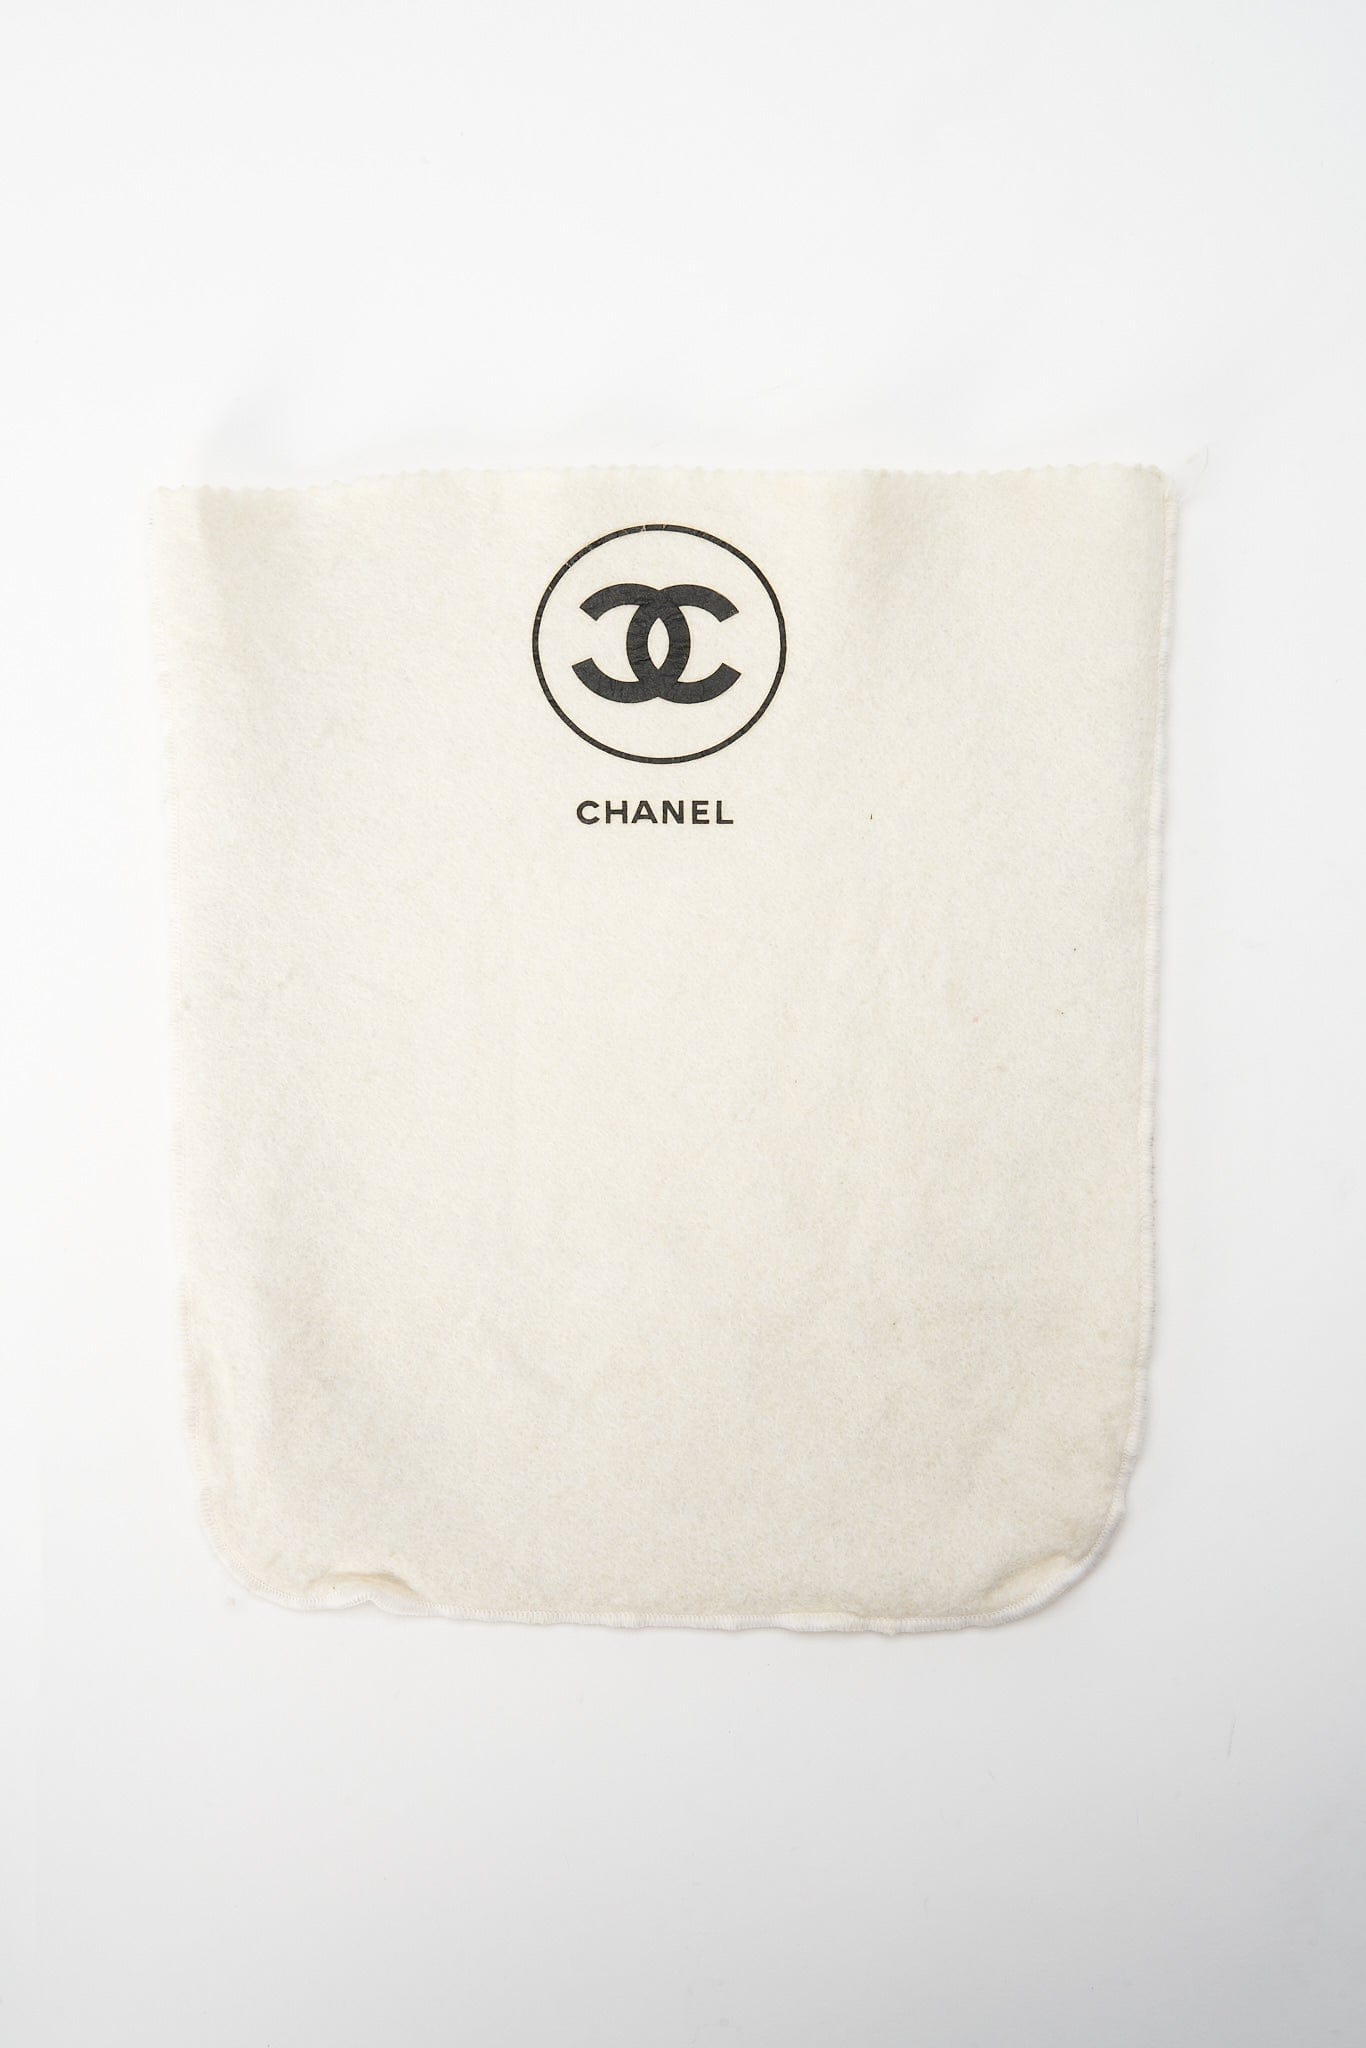 Chanel Classic Medium Double Flap Bag with 24k gold plated hardware